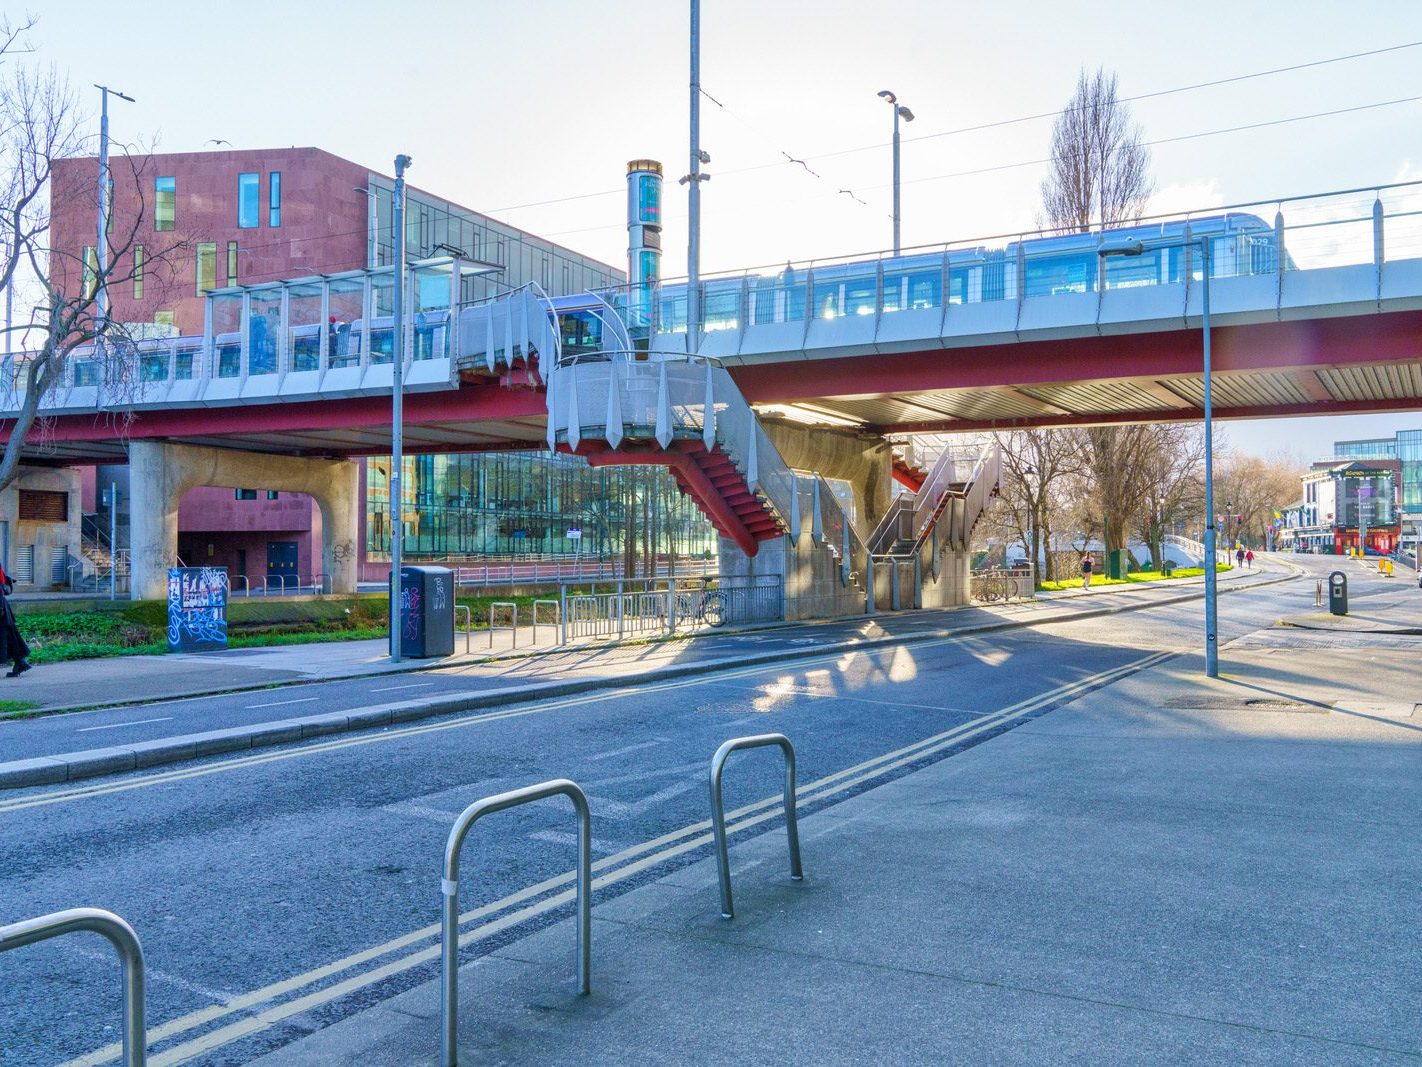 CHARLEMONT LUAS TRAM STOP AND BRIDGE ACROSS THE GRAND CANAL [AND NEARBY]-228033-1